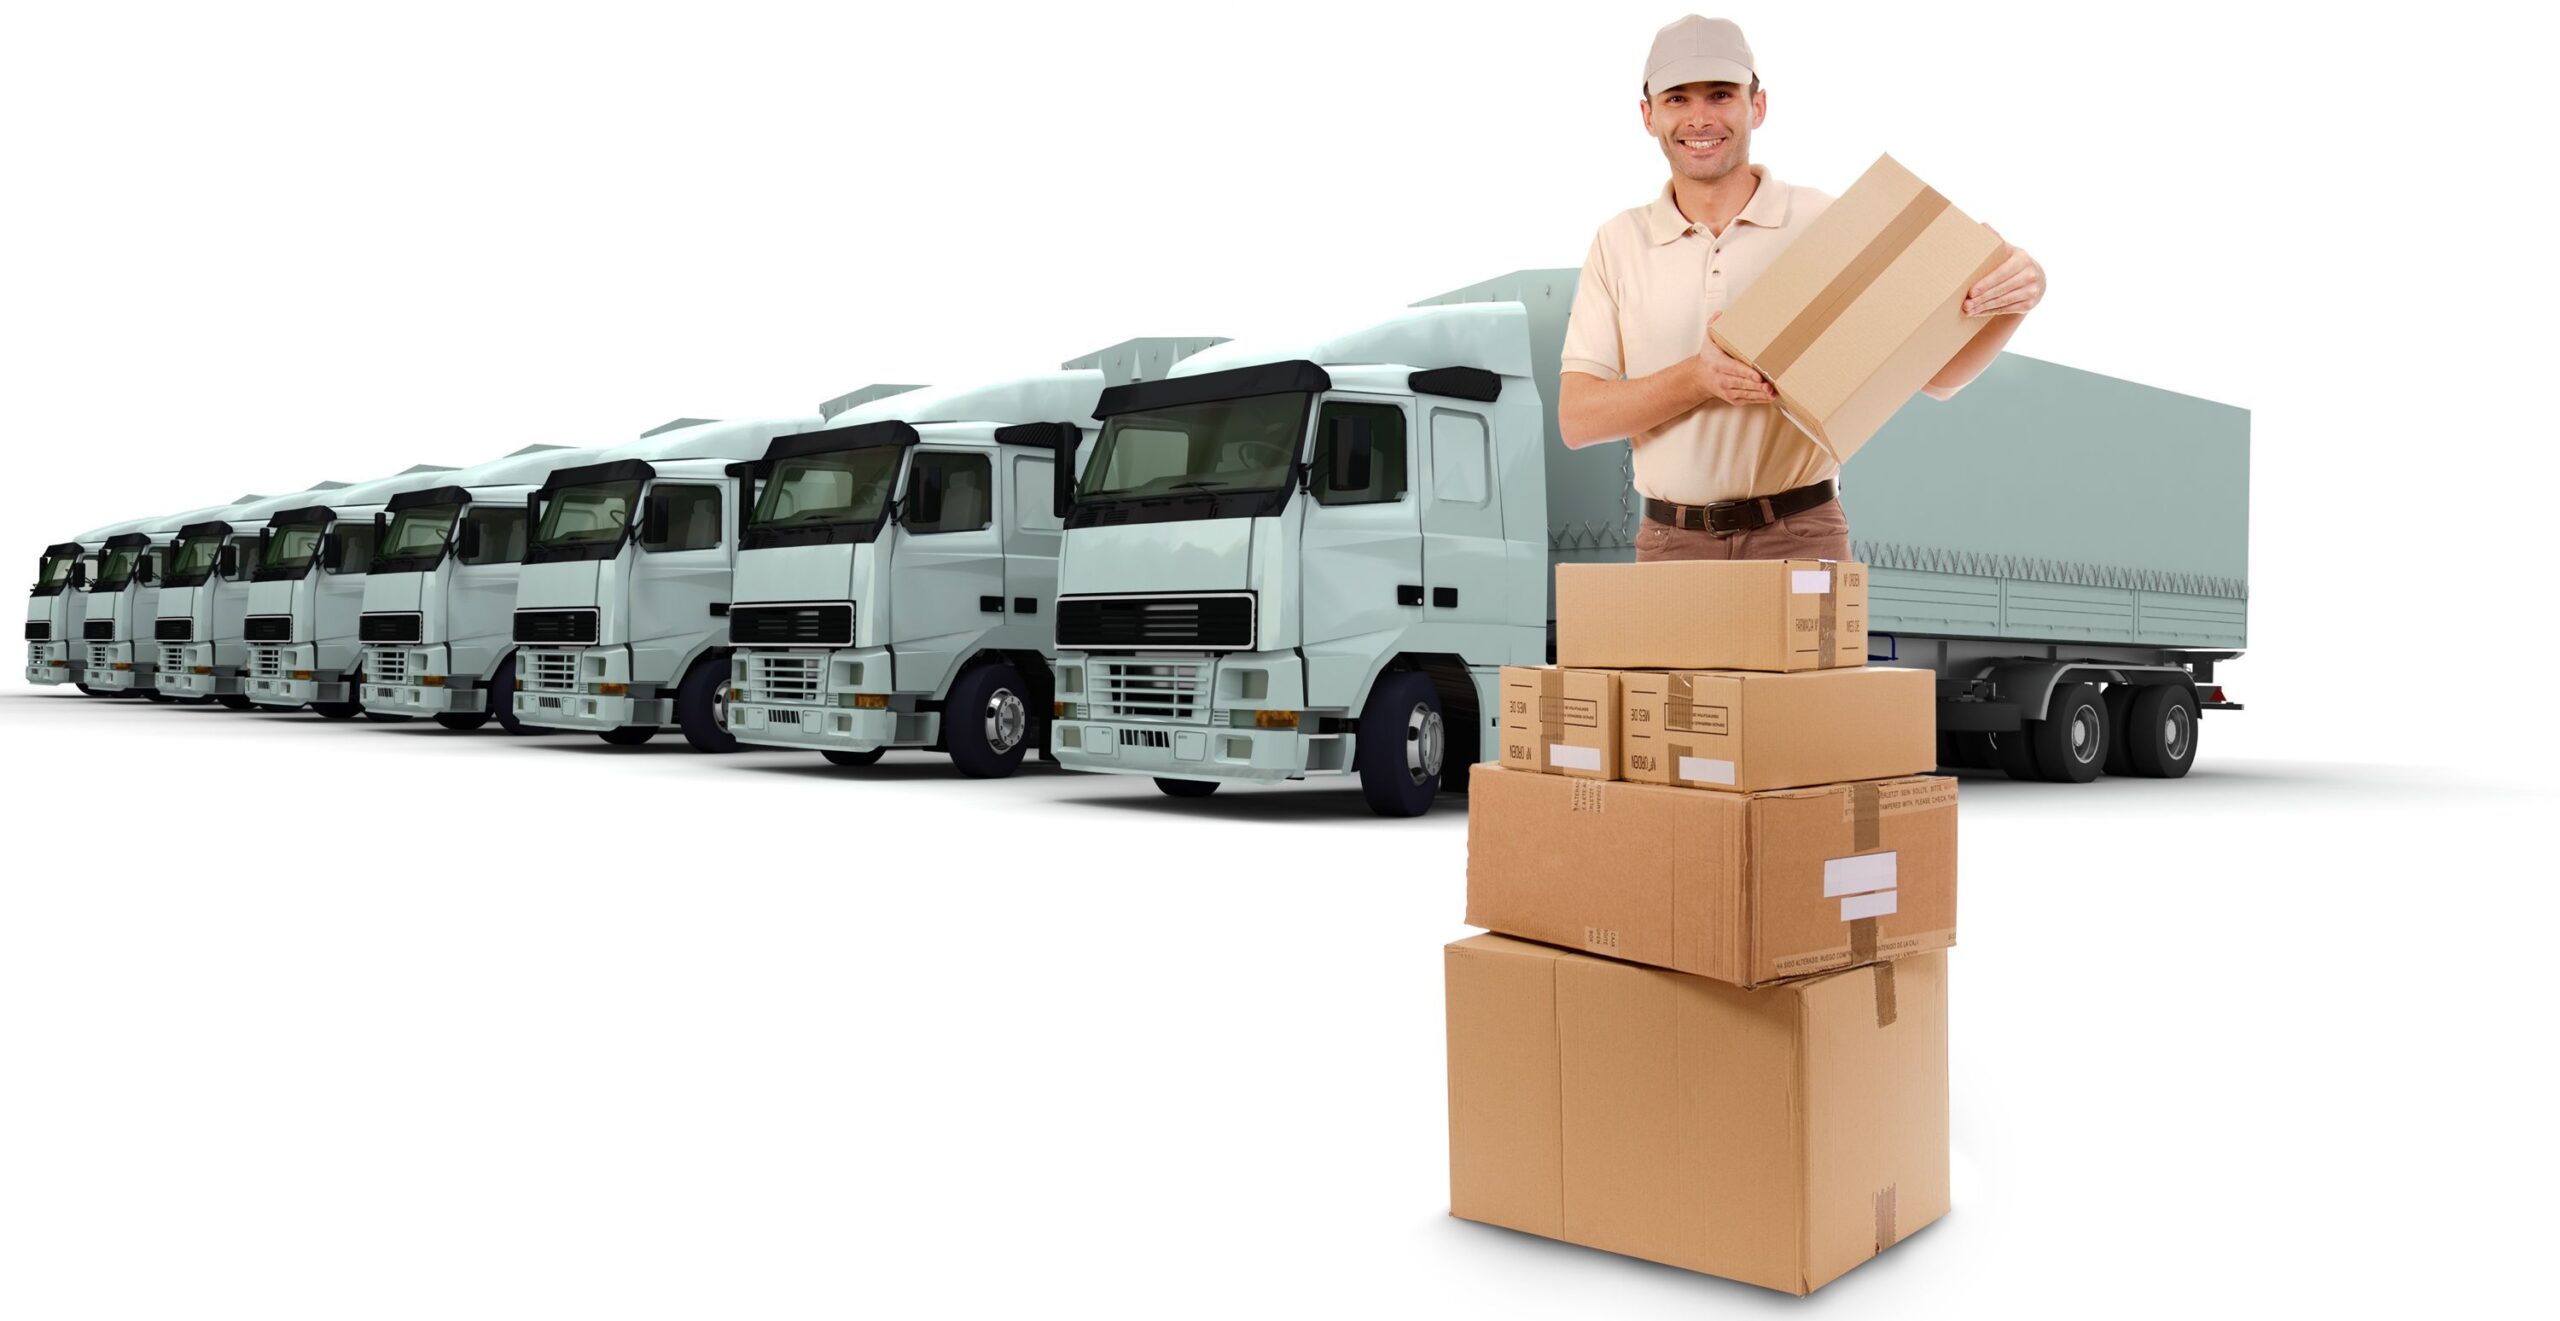 Logistics Services in London, England